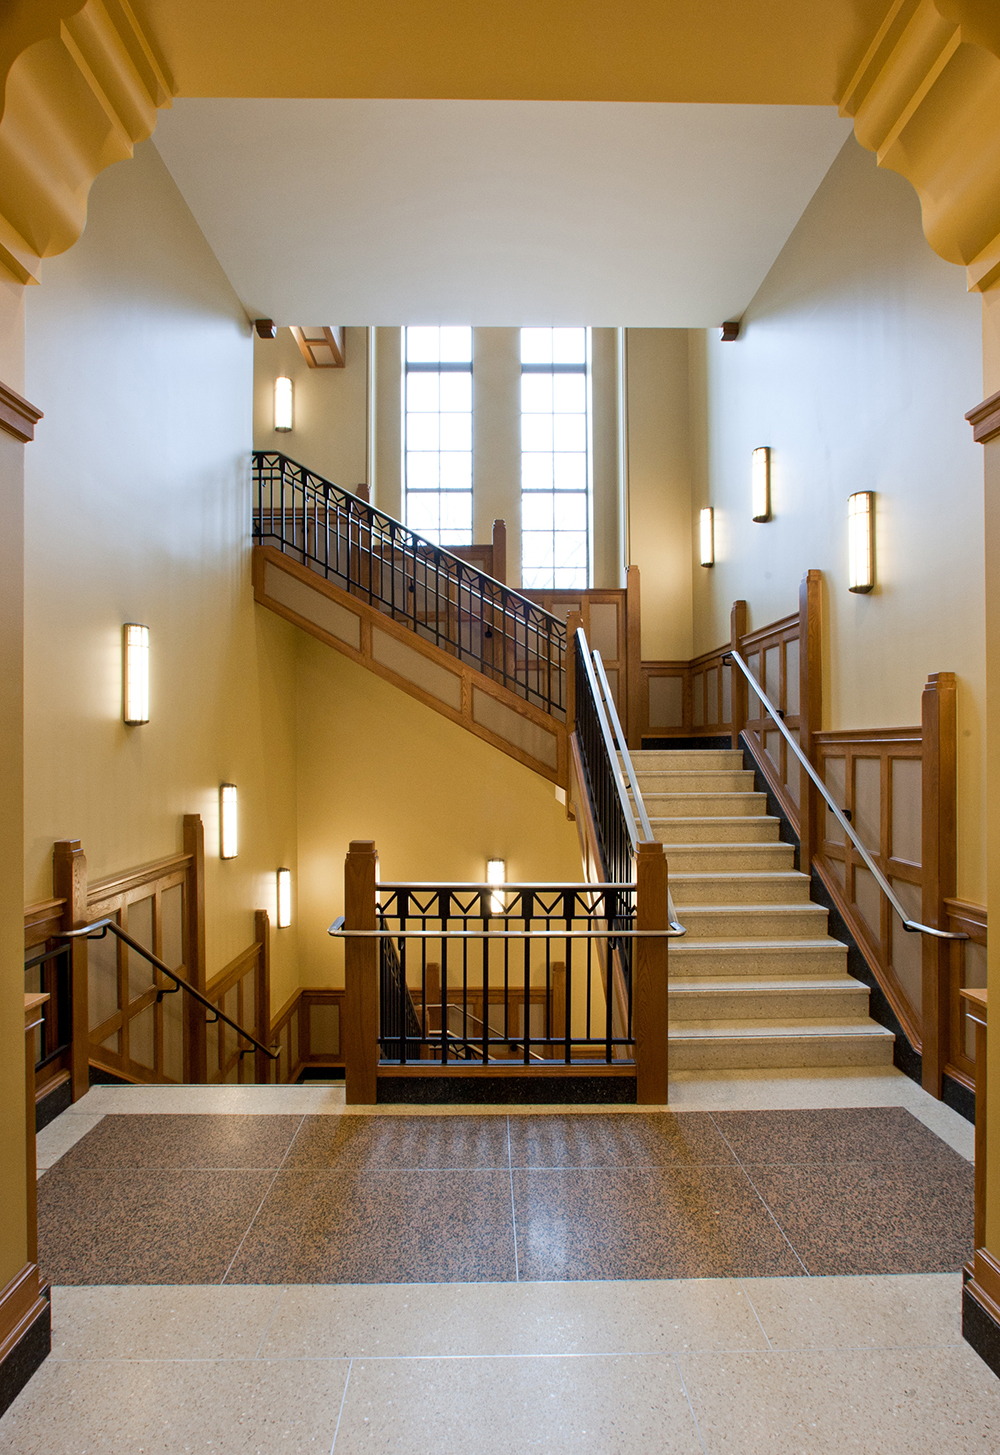 These wall-mounted custom light fixtures illuminate a traditional campus stairwell.